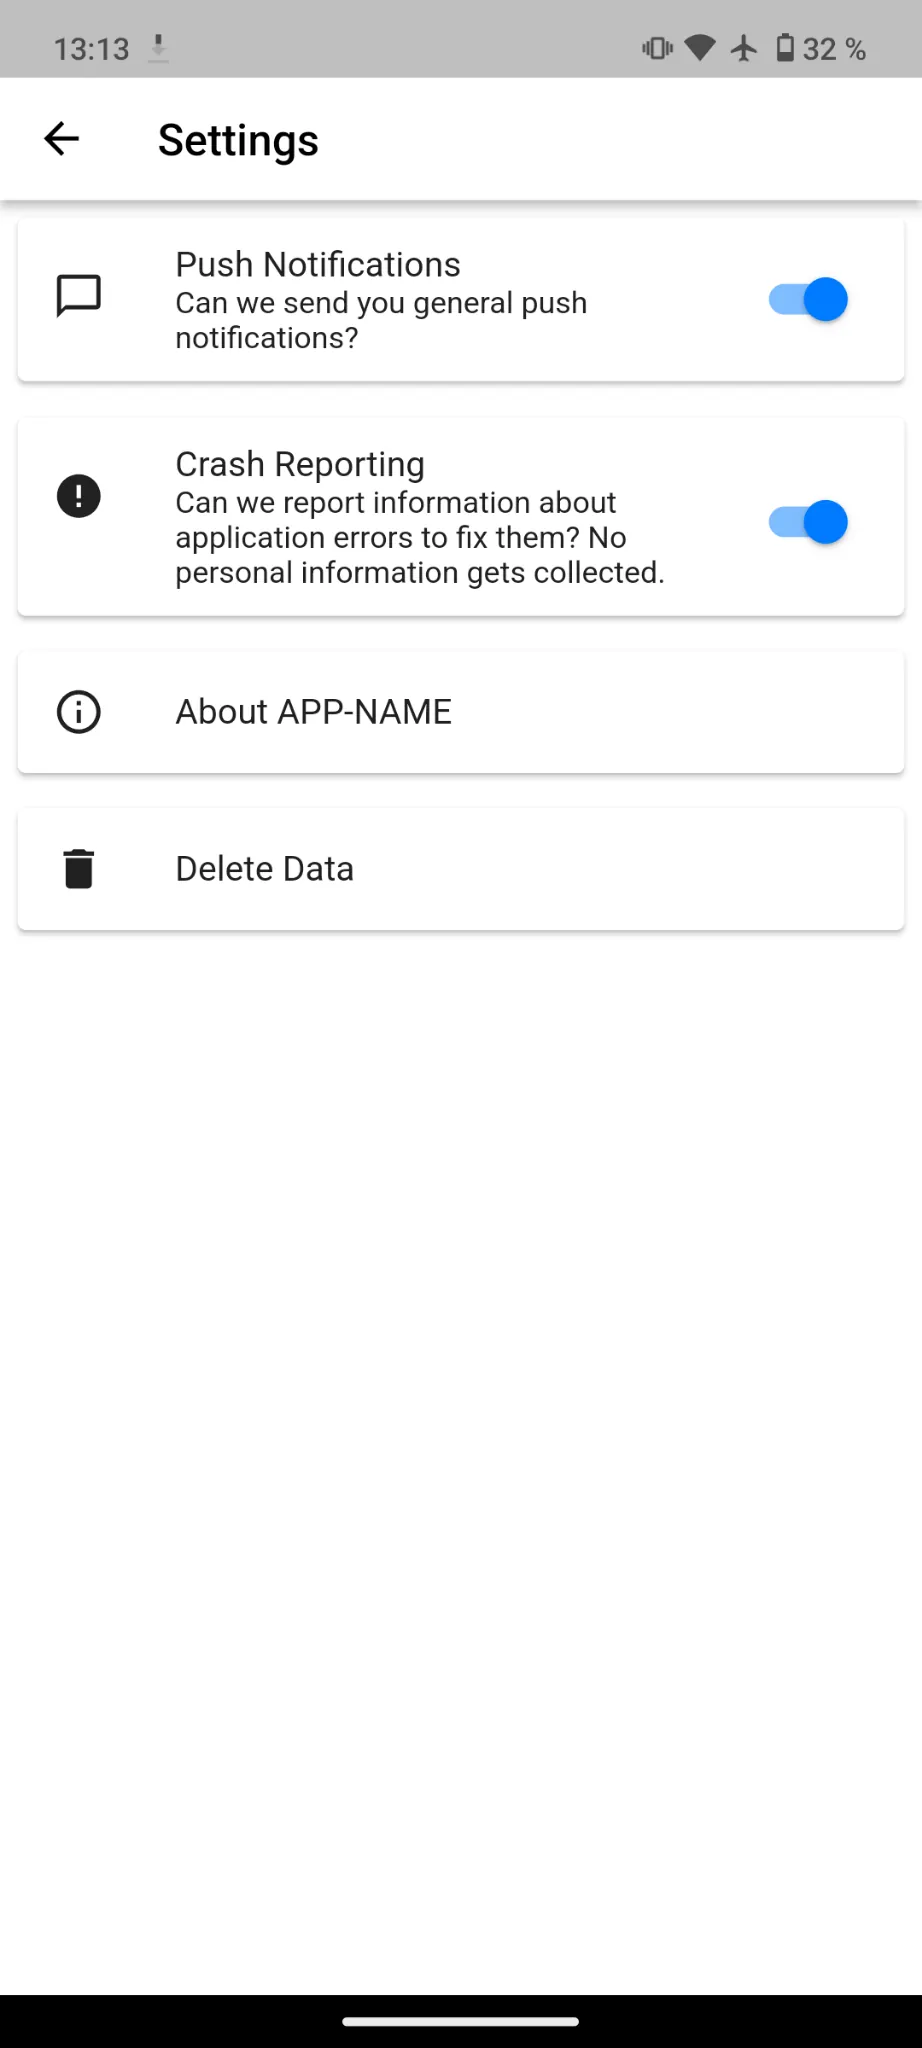 A screenshot of the app settings showing the delete data card.